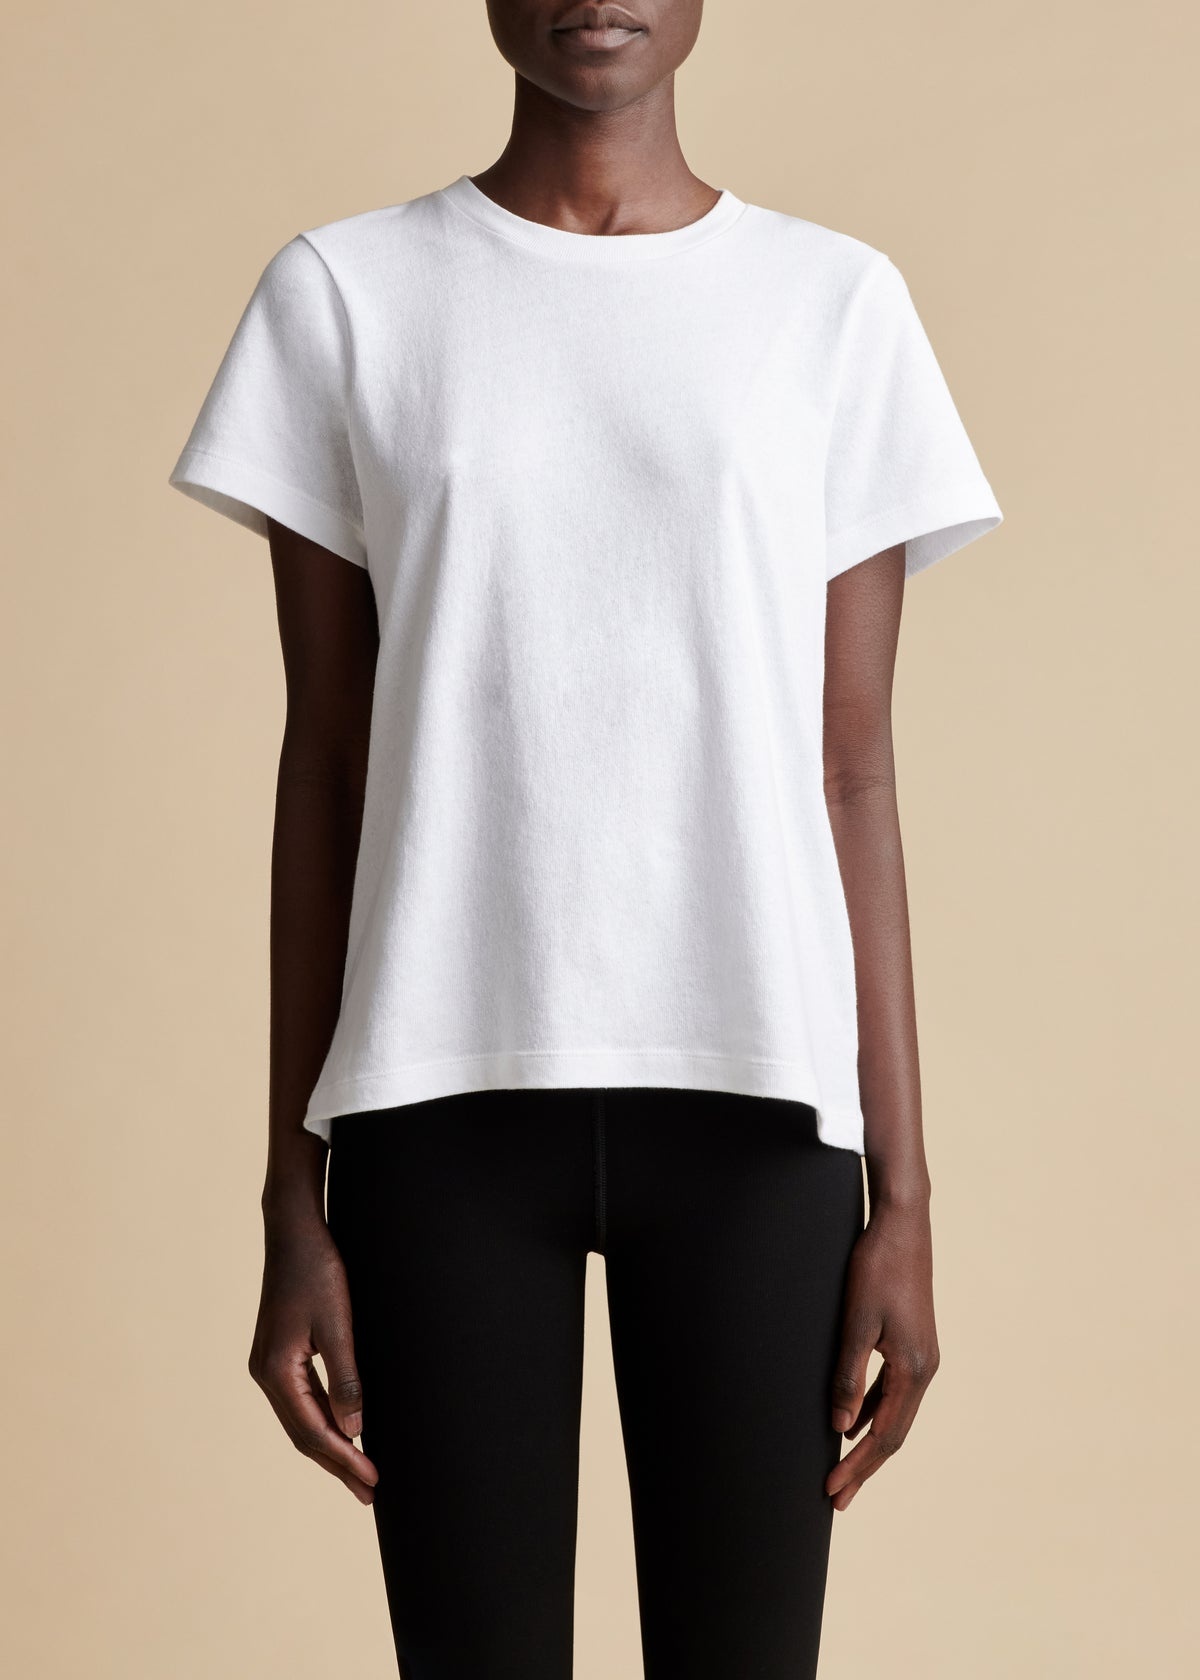 The Emmylou T-Shirt in White - 1